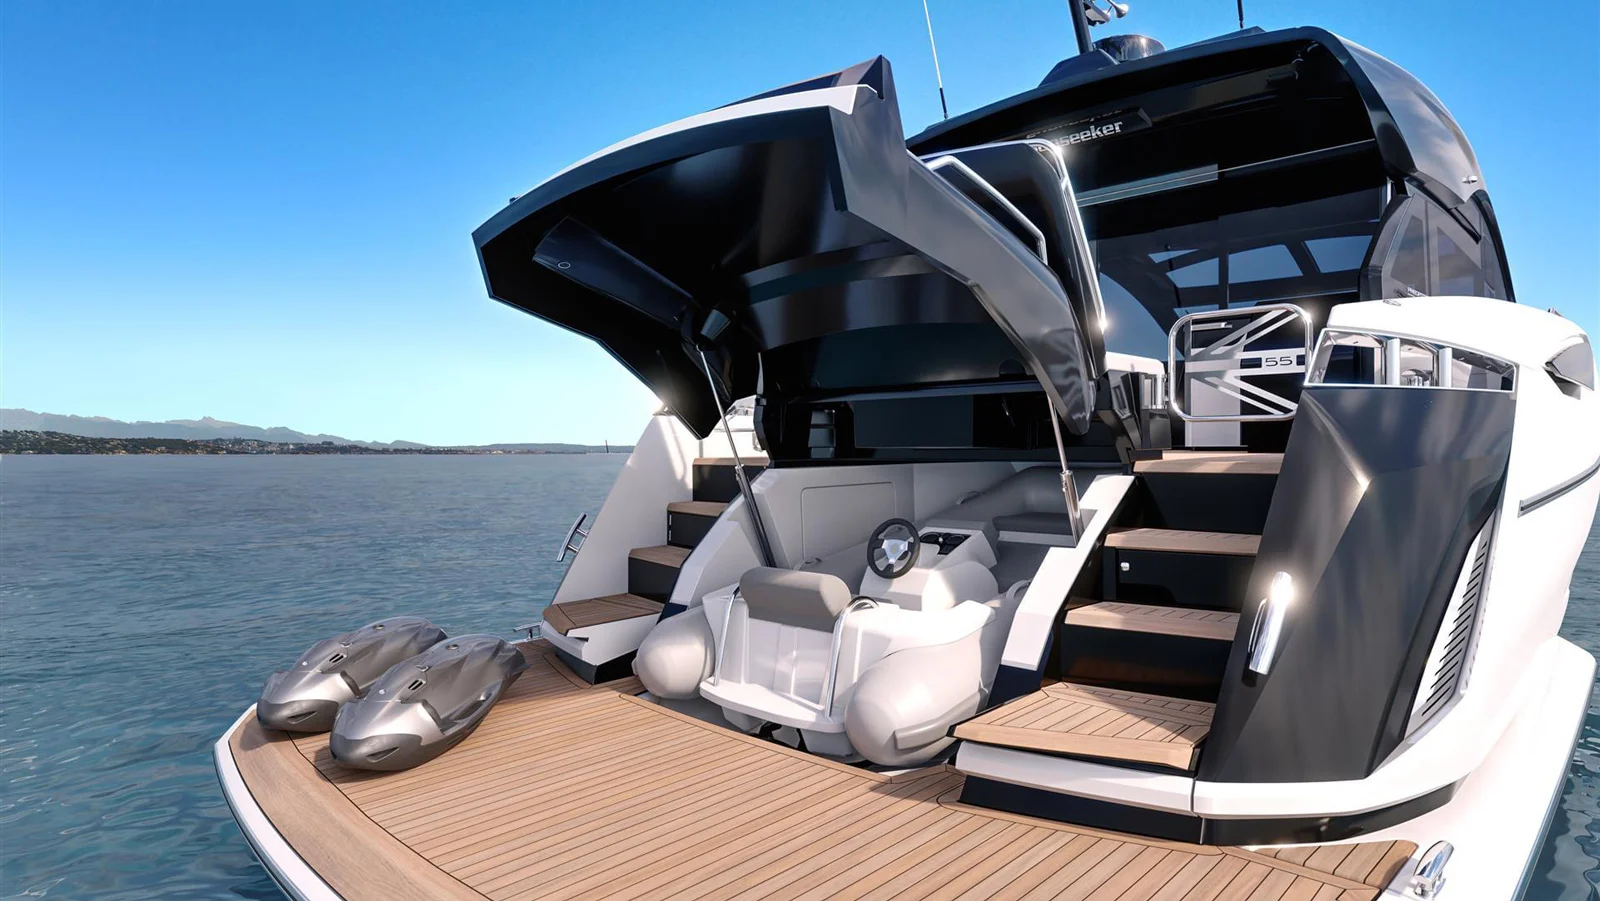 The yacht has a garage for a 3.3-meter tender